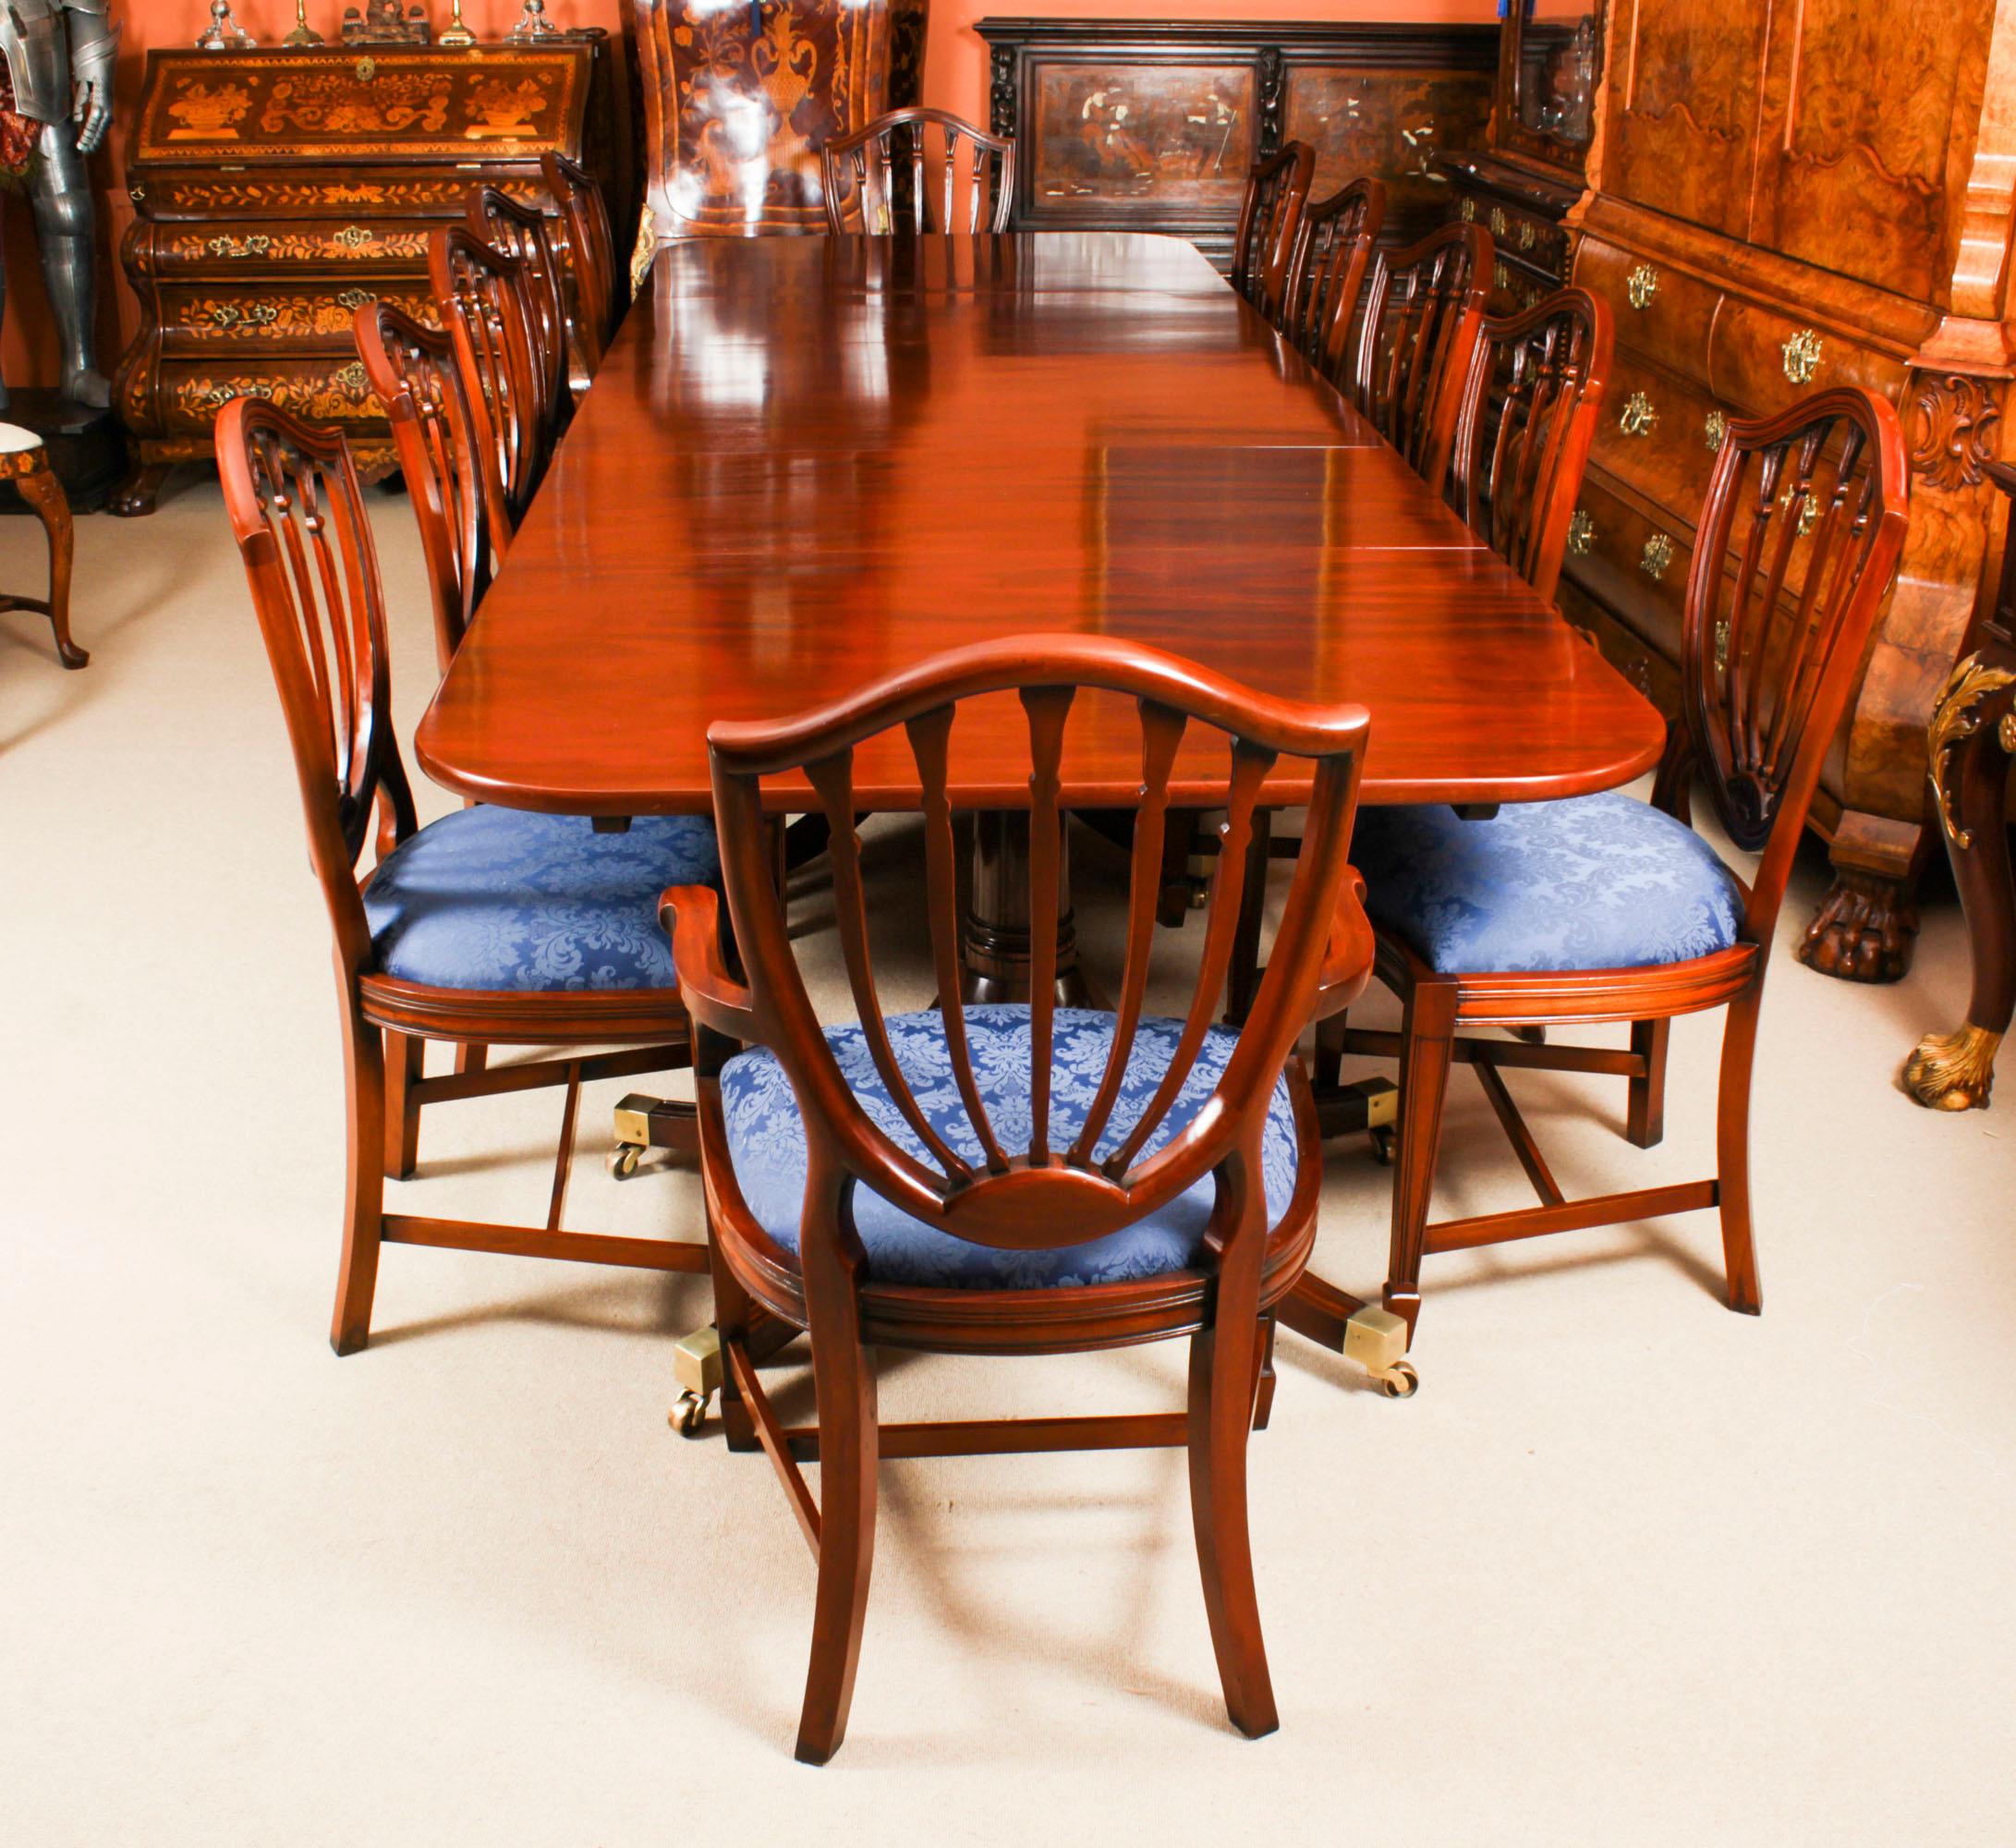 This is an elegant antique  dining set that comprises an antique Regency  triple pillar dining table dating from C1830 and a set of twelve Hepplewhite  Revival 20th C dining chairs.

The table has two leaves which can be added or removed as required